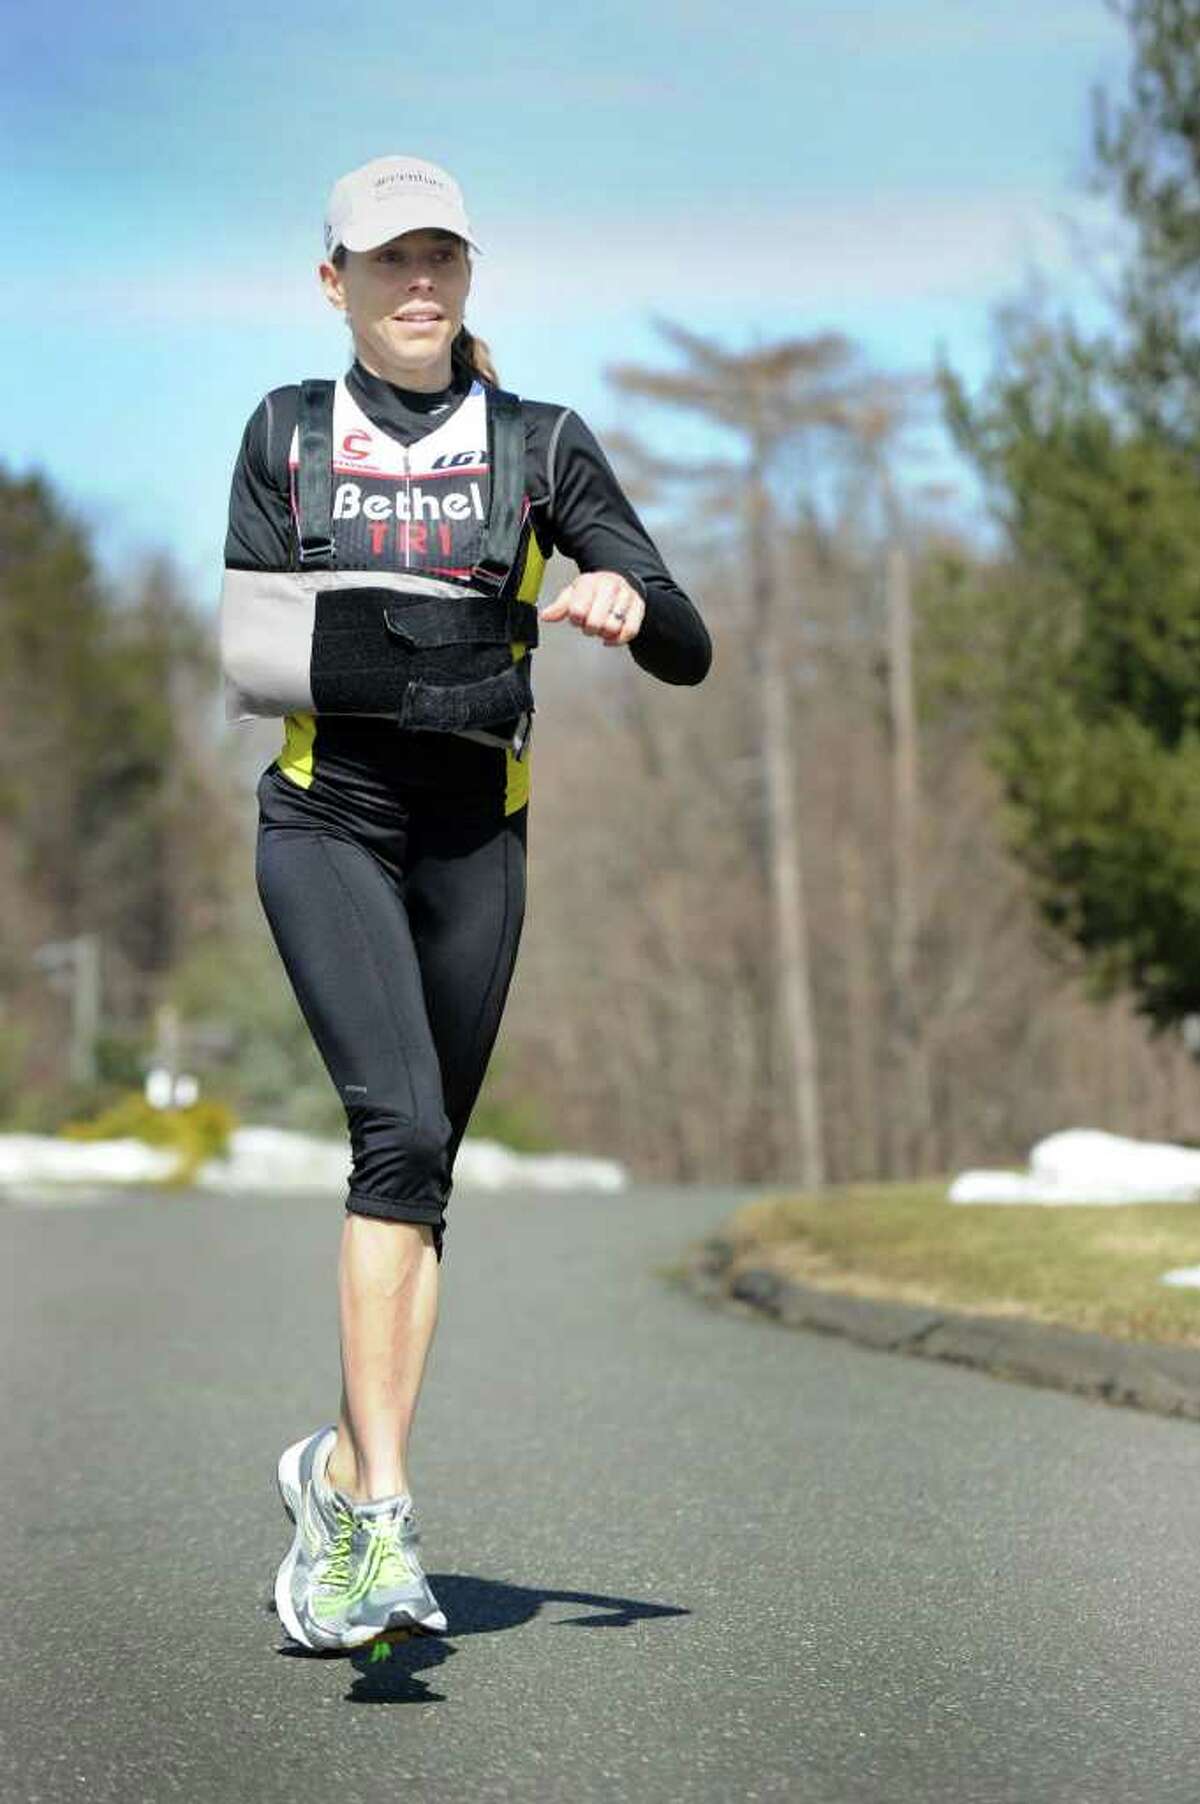 Robin Caruso of Ridgefield is a triathlete. The mother of three was hit by a car and lost the use of her right arm. Photo taken Wednesday, March 2, 2011.